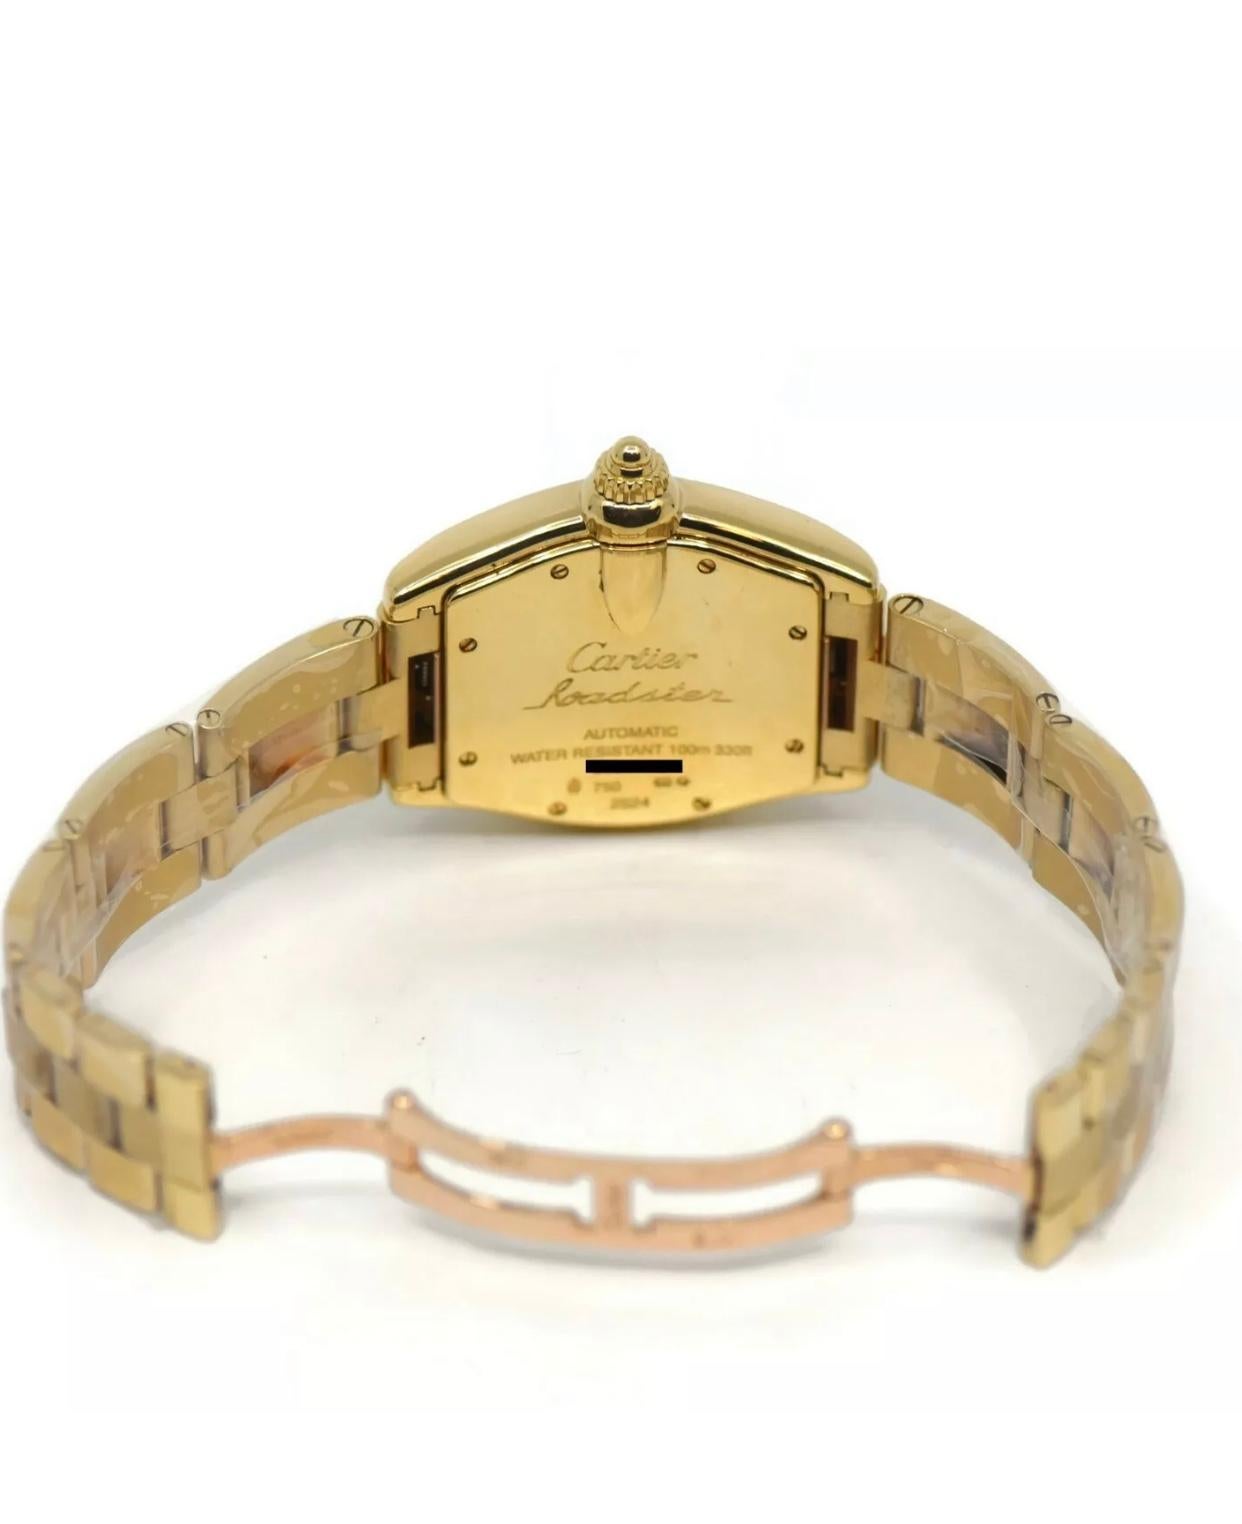 Large size, 18K yellow gold case, silver sunray dial, automatic winding mechanical movement. 18K yellow gold bracelet
Case 37 MM
Brand Cartier
Model Roadster
Water RESISTANT 330FT/100M
18k Gold 201 Grams
2524
10167CE
Case material Yellow